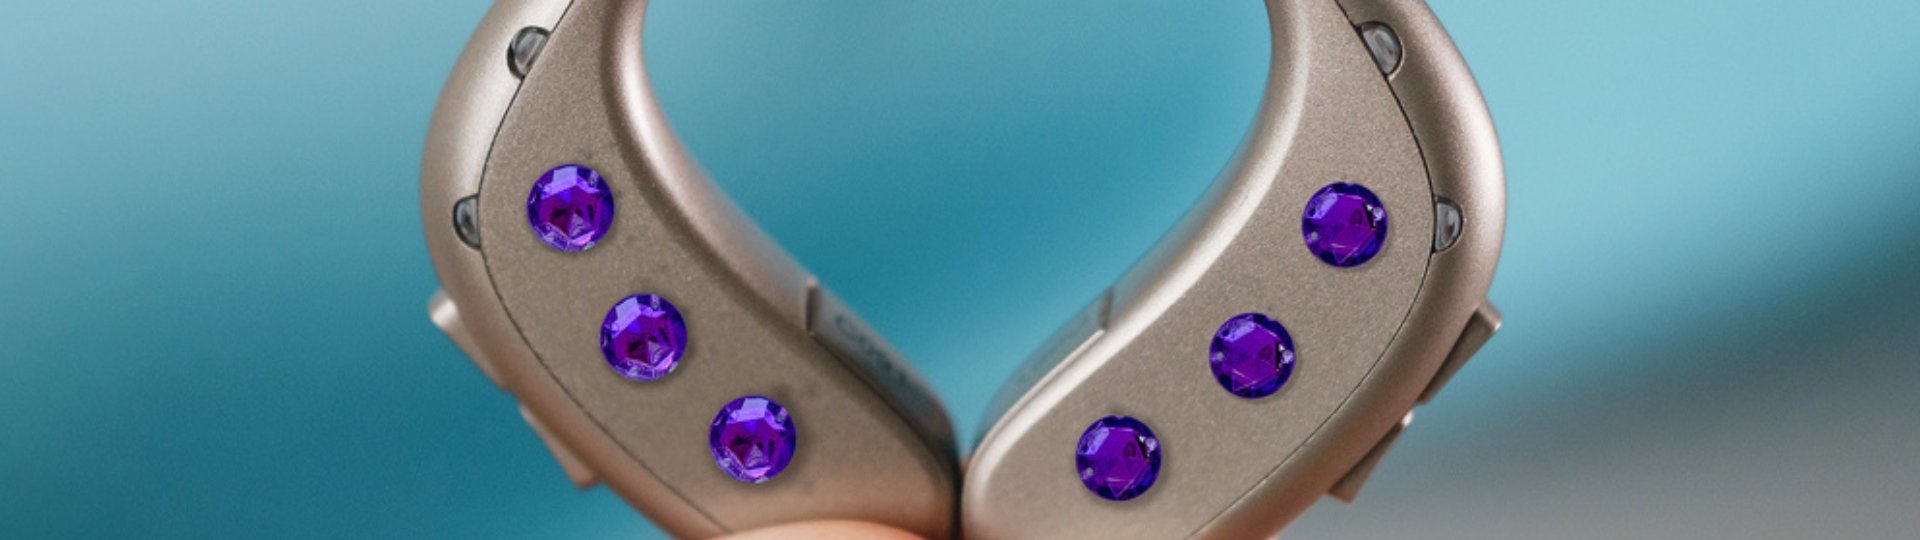 a pair of hearing aids decorated with jewels